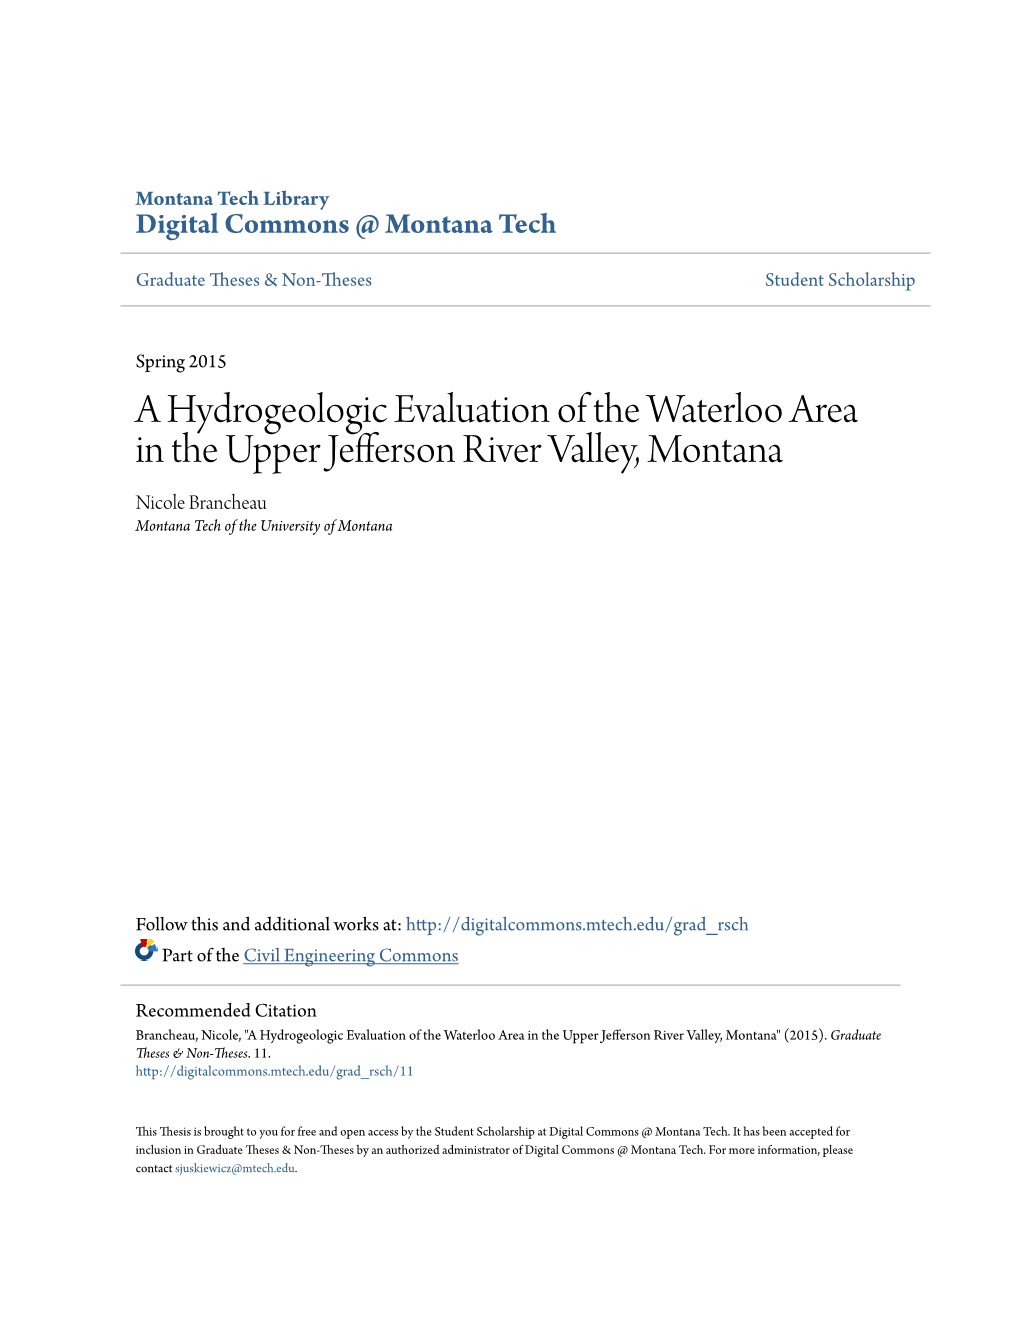 A Hydrogeologic Evaluation of the Waterloo Area in the Upper Jefferson River Valley, Montana Nicole Brancheau Montana Tech of the University of Montana